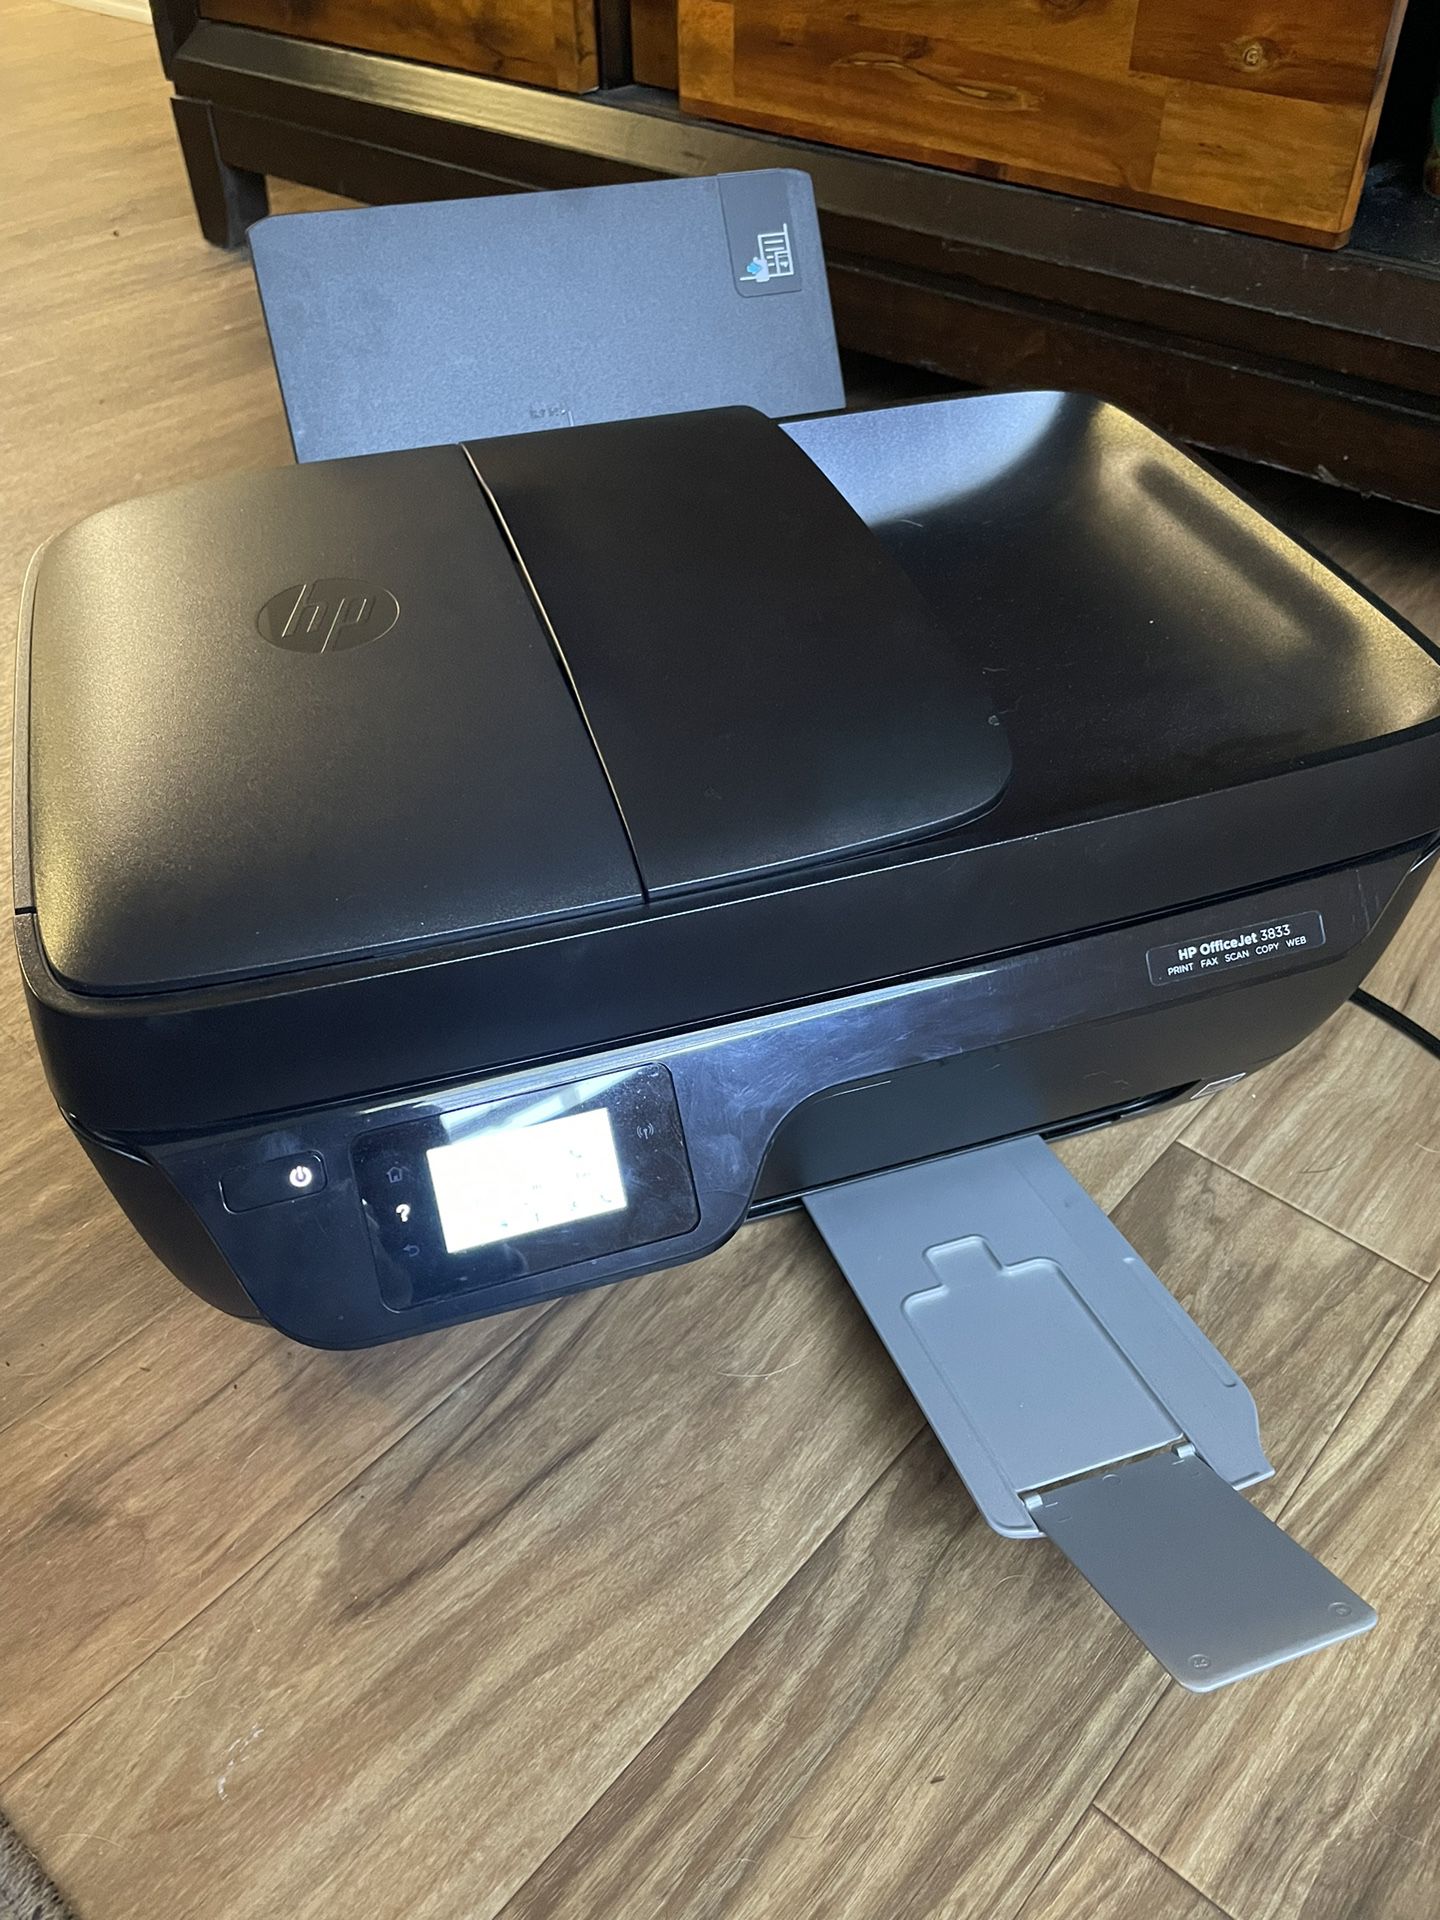 HP Office Jet 3833 All-in-one Printer